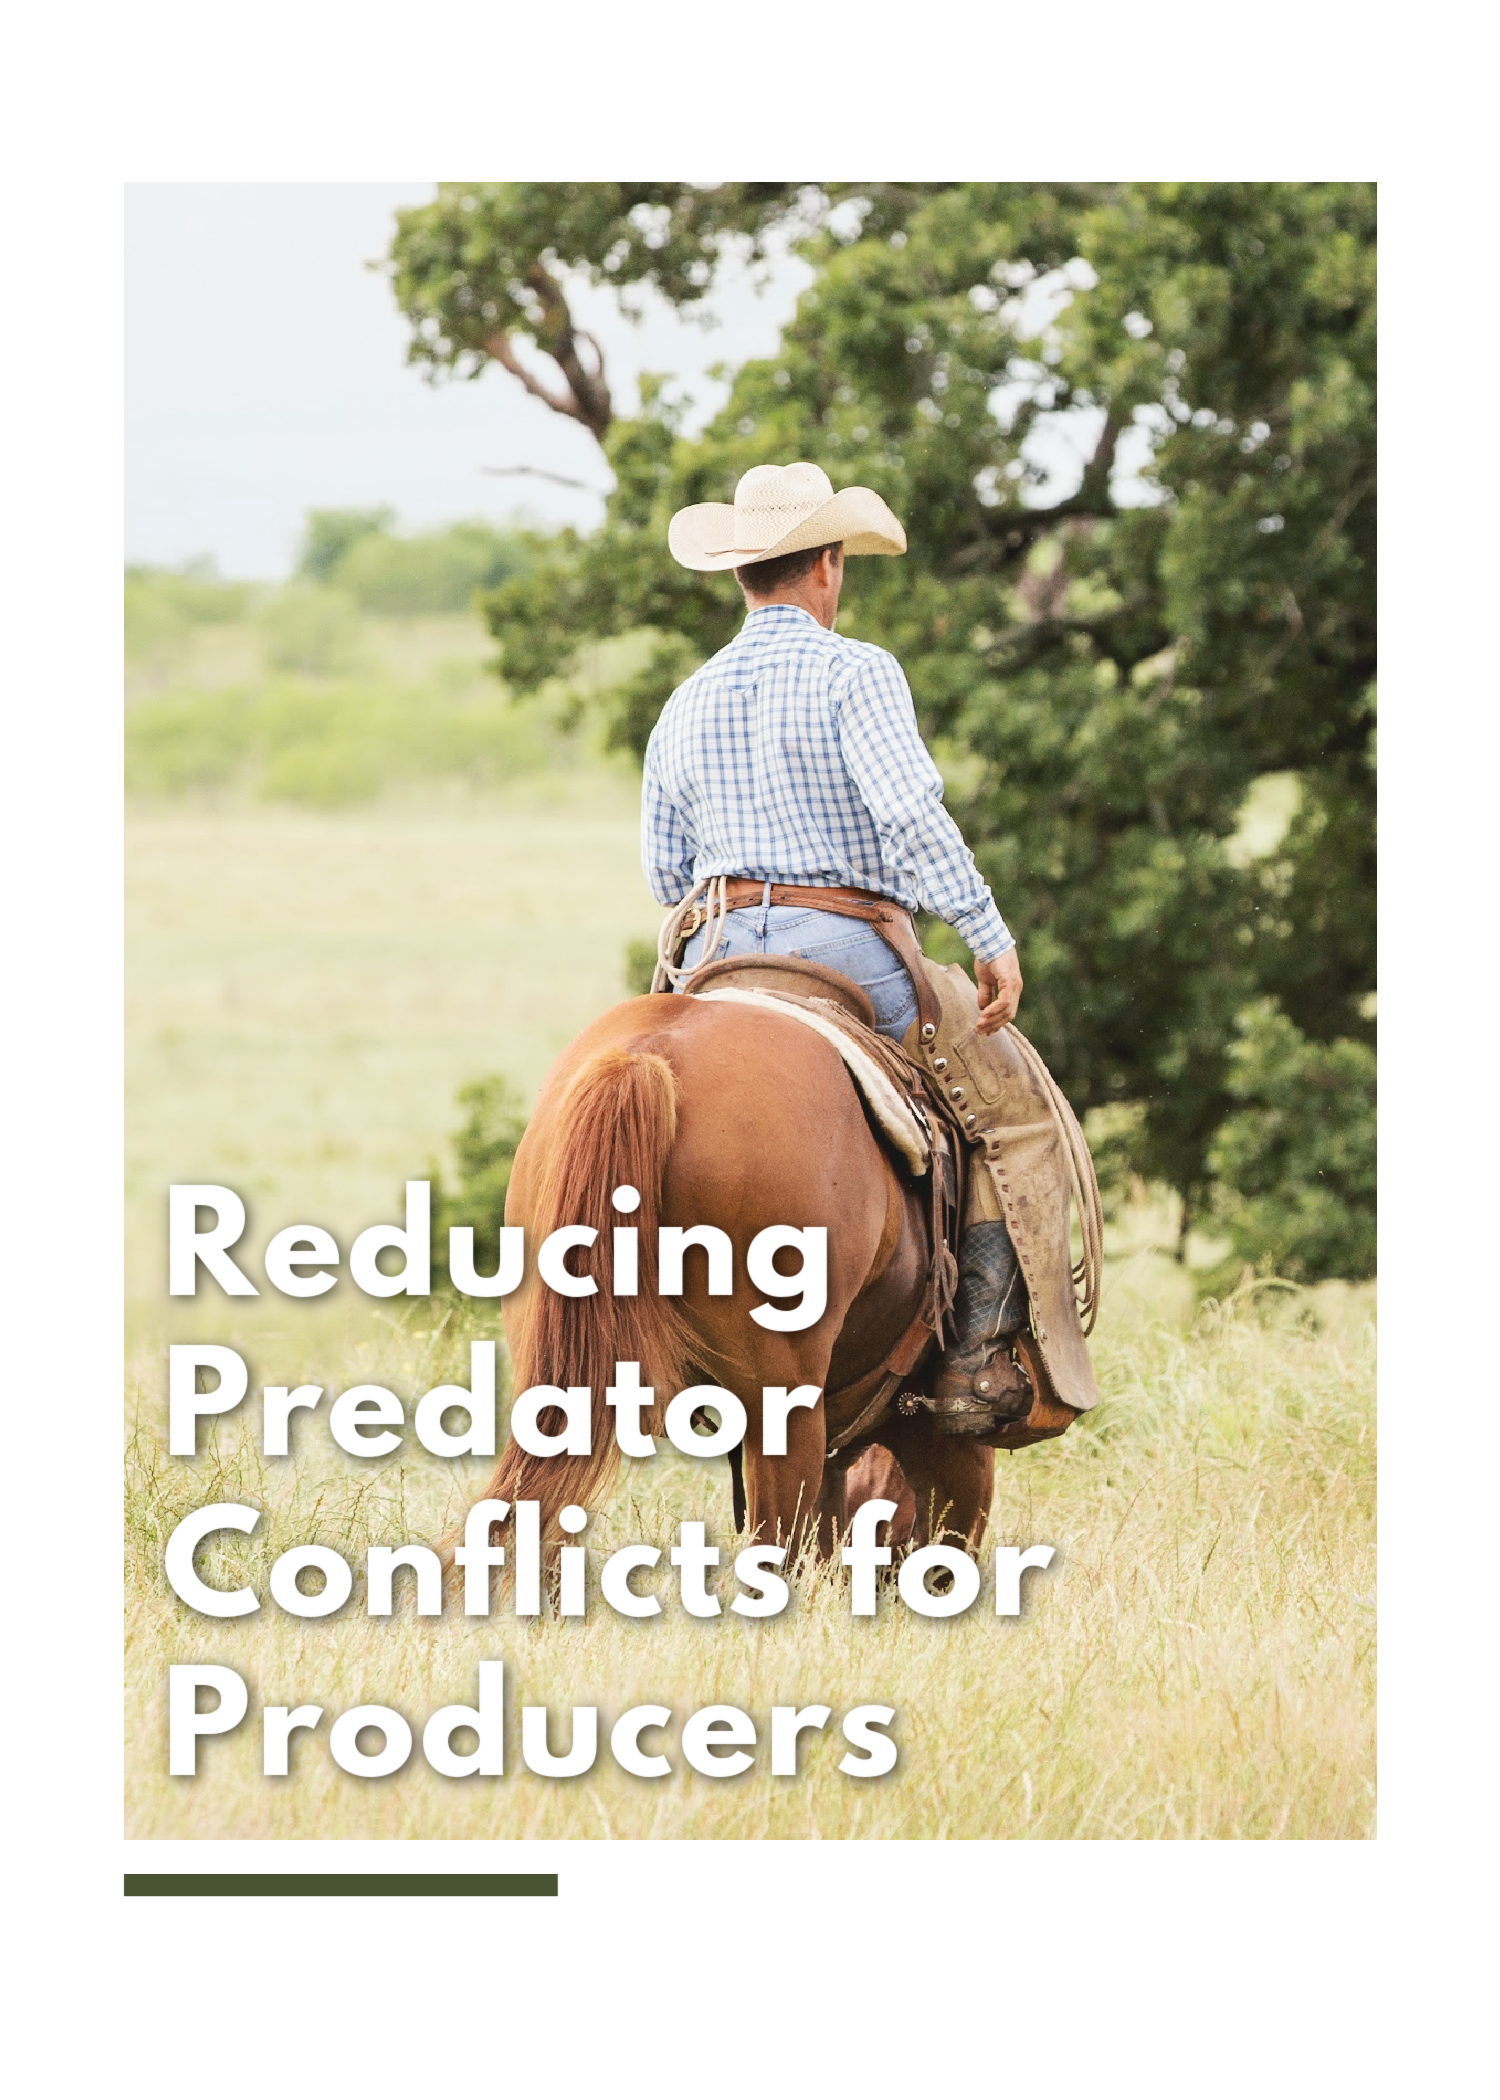 Rancher on a horse in a grassy field with the words Reducing Predator Conflicts for Producers